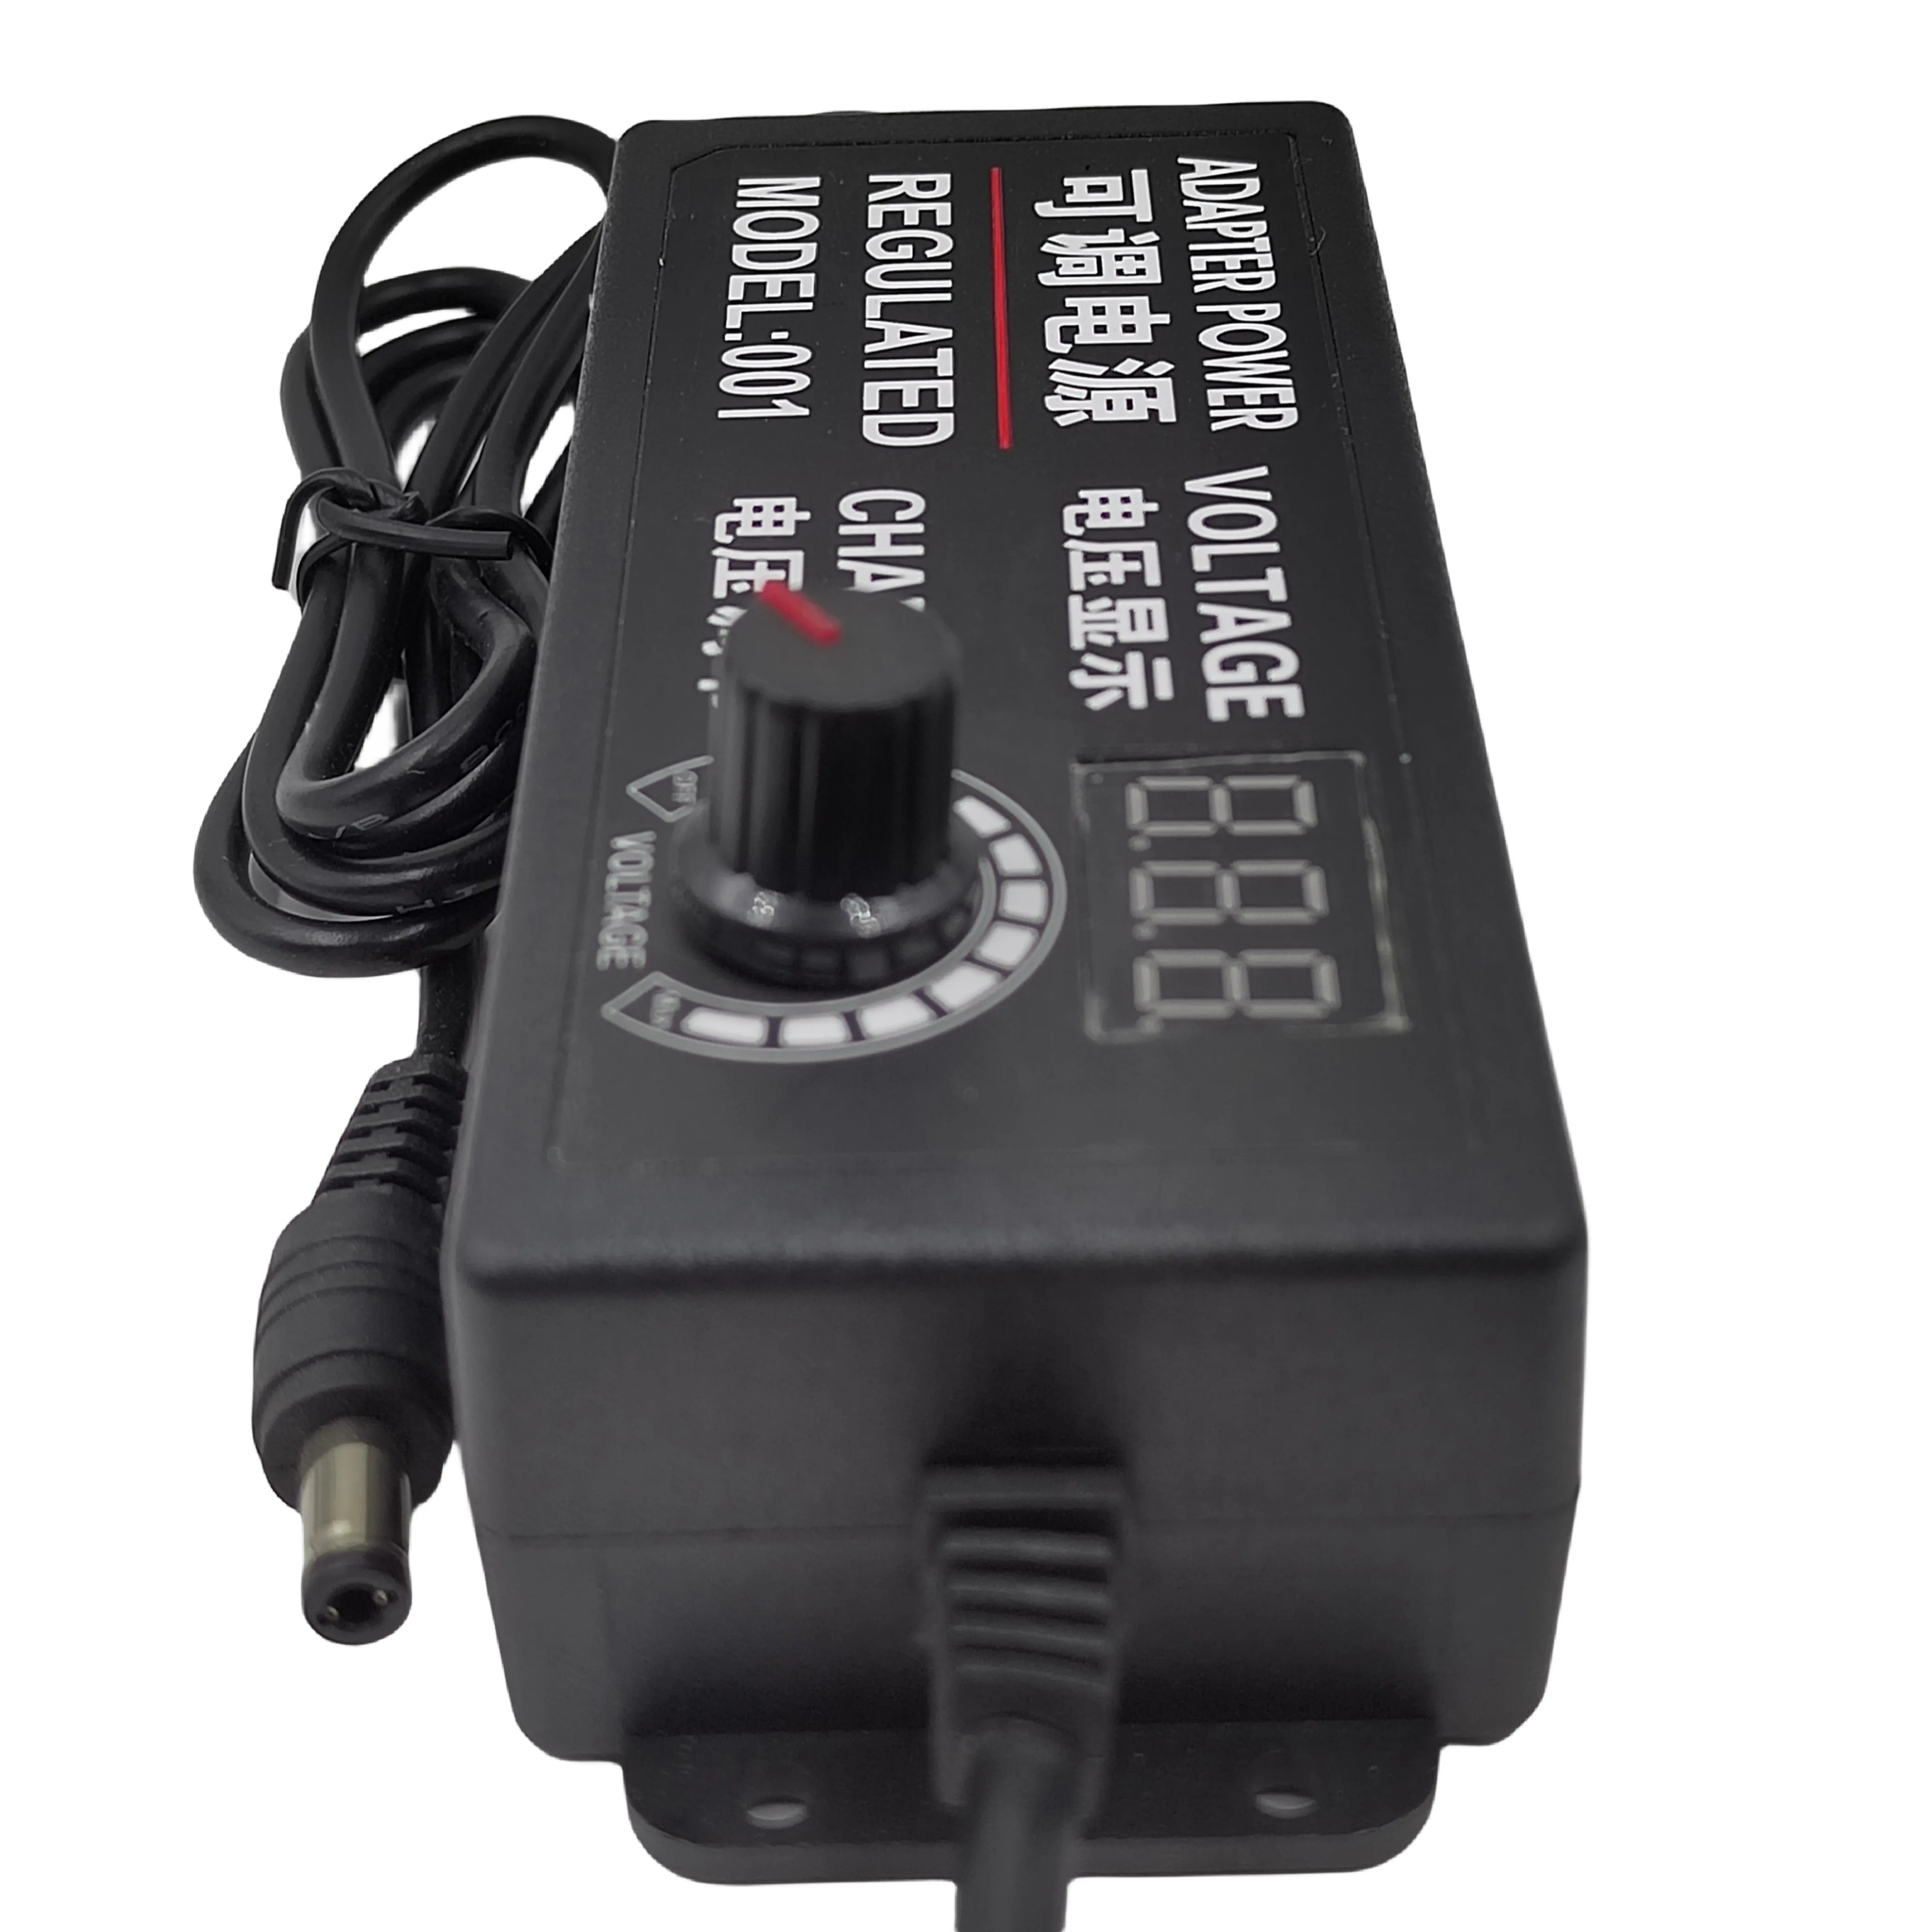 3-24V 3A Adjustable Voltage Power Adapter 12V DC Speed Control Dimming Light With Pump Motor Digital Display US Power Supply